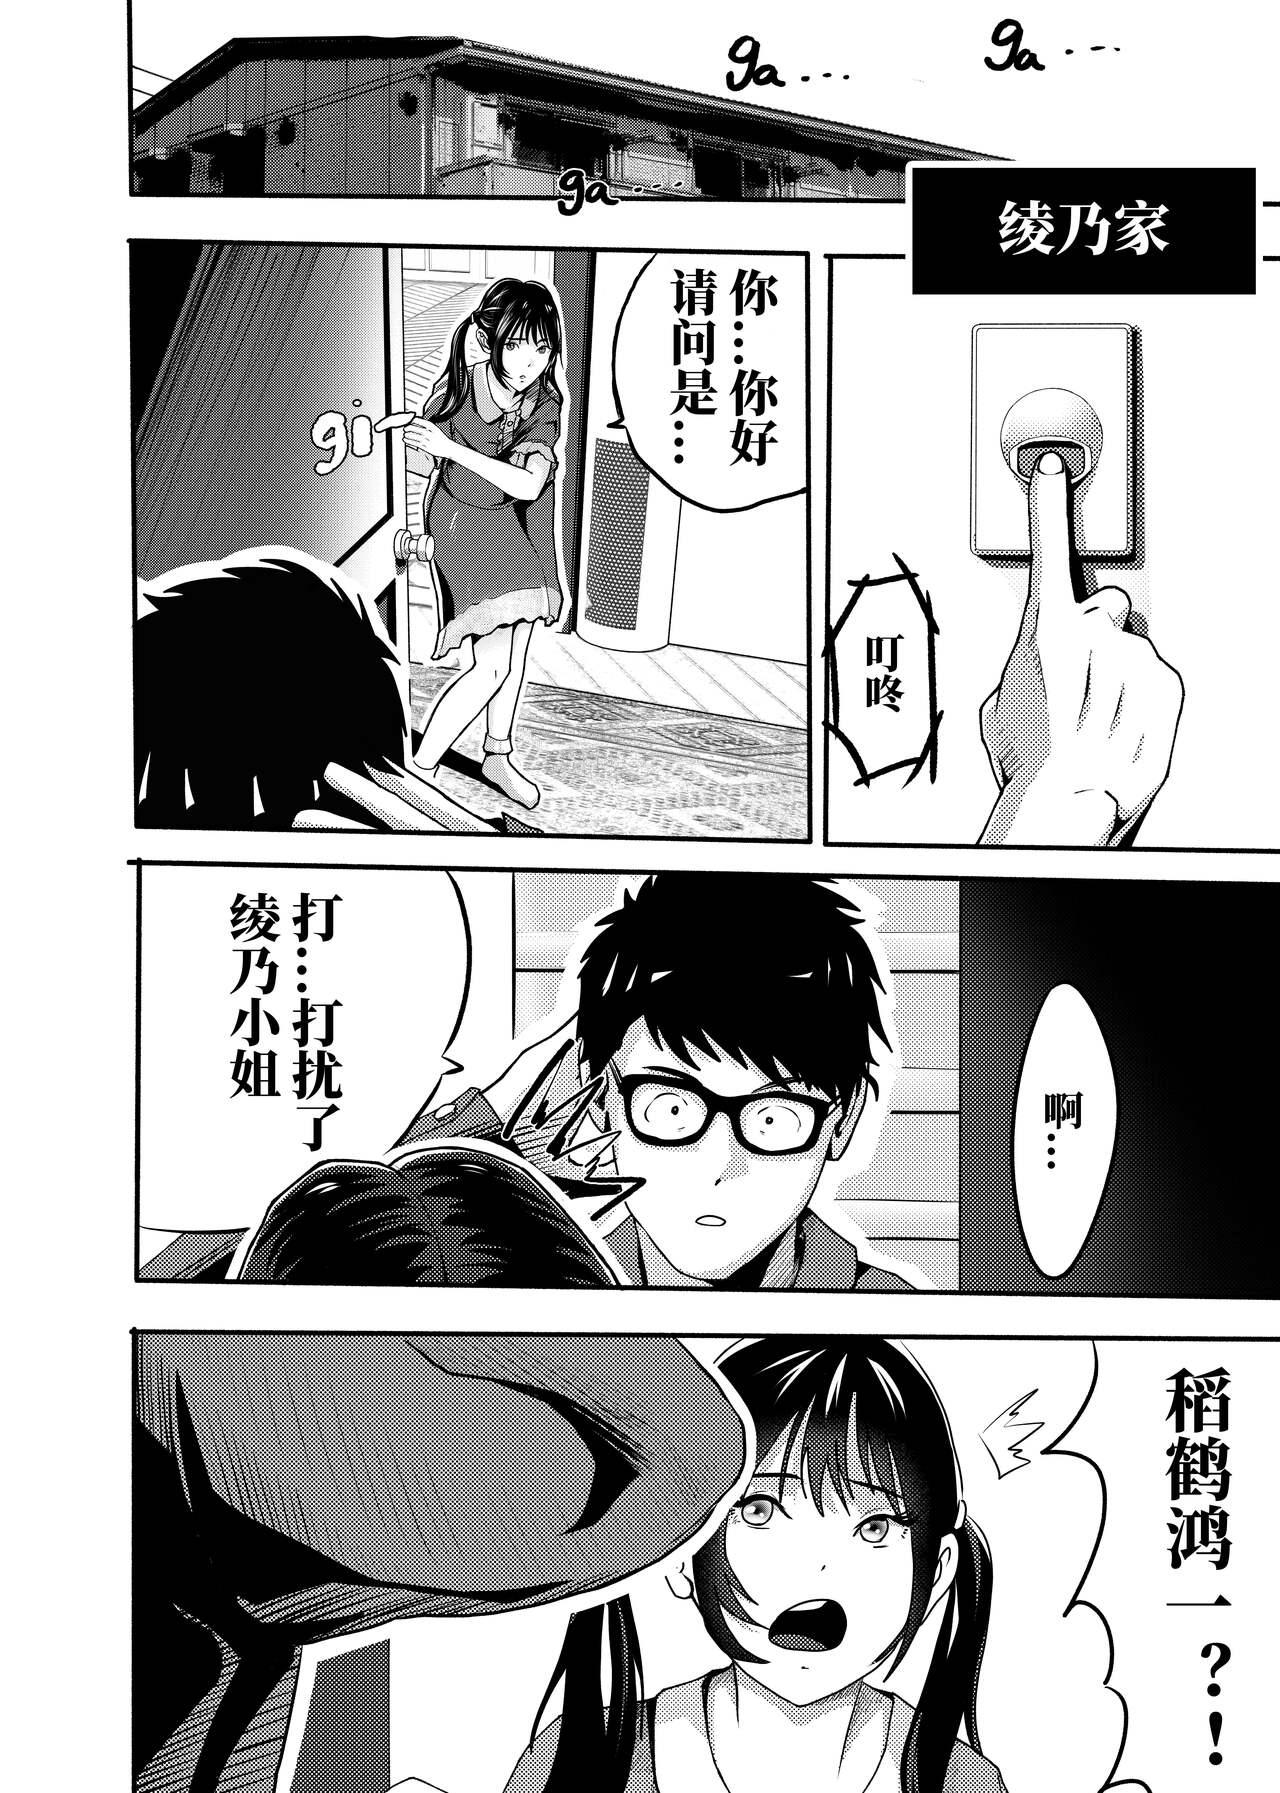 [KAO.YELLOW STUDIO (T.C.X)] I must be out of my mind to fall in love with SAORI, the Snuff Queen Ch.1-16 | 想与冰恋女王纱织同学谈恋爱的我脑子一定有问题 第1-16话 [Chinese] 247